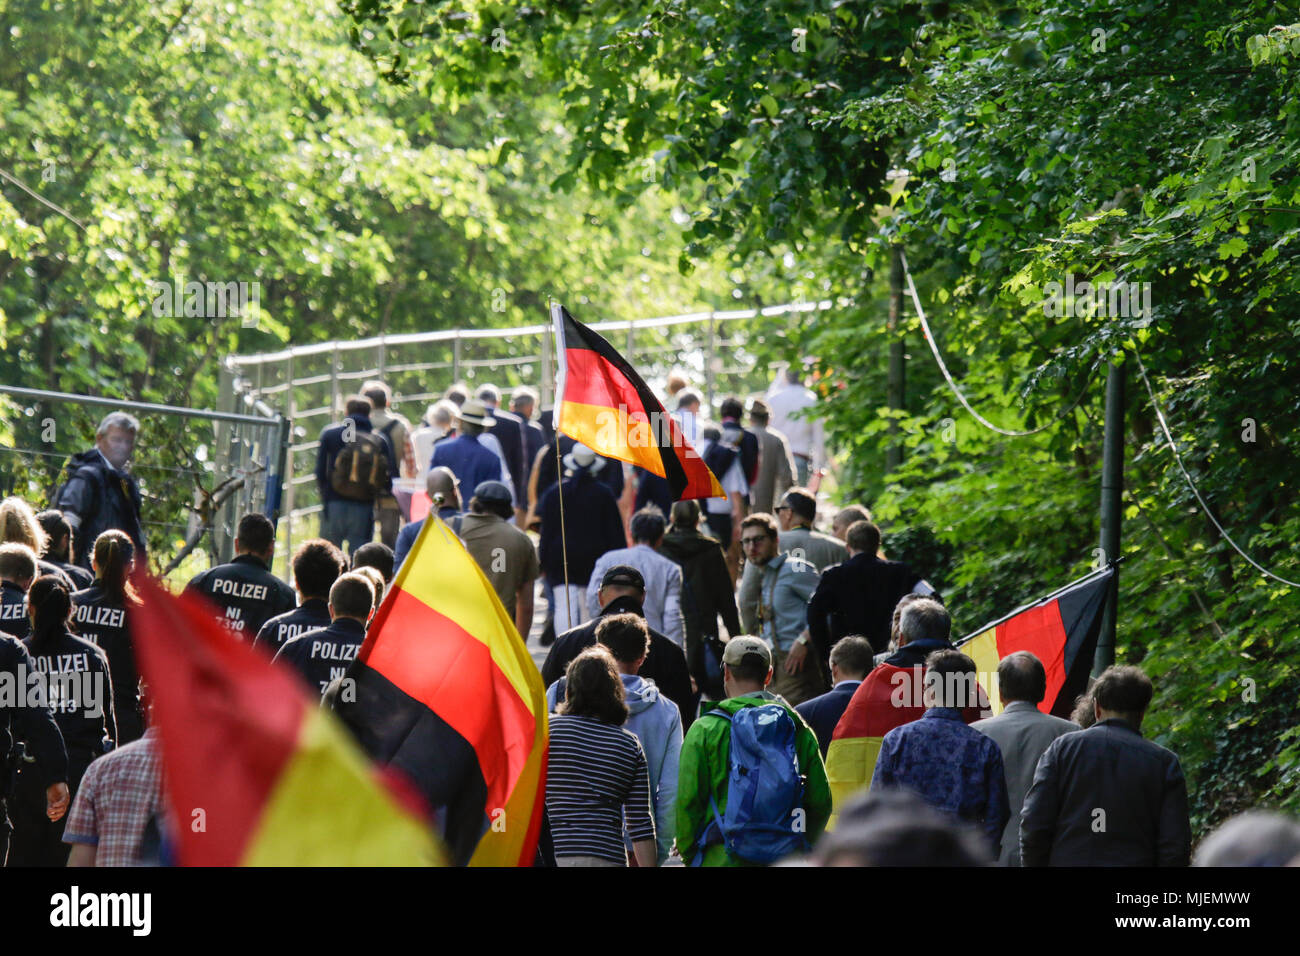 Neustadt, Germany. 5th May 2018. Participants of the 'Patriotic Hike' walk up the hill to the Haibach Castle, carrying German flags. The New Hambach Festival, organised by national-conservative and members of the new right, took place at the Hambach Castle. Organised by controversial Christian Democratic Union of Germany) member and Alternative for Germany) sympathiser Max Otte, it sees controversial speakers such as Thilo Sarrazin, Vera Lengsfeld and Federal spokesman for the AfD Jorg Meuthen. Credit: Michael Debets/Alamy Live News Stock Photo